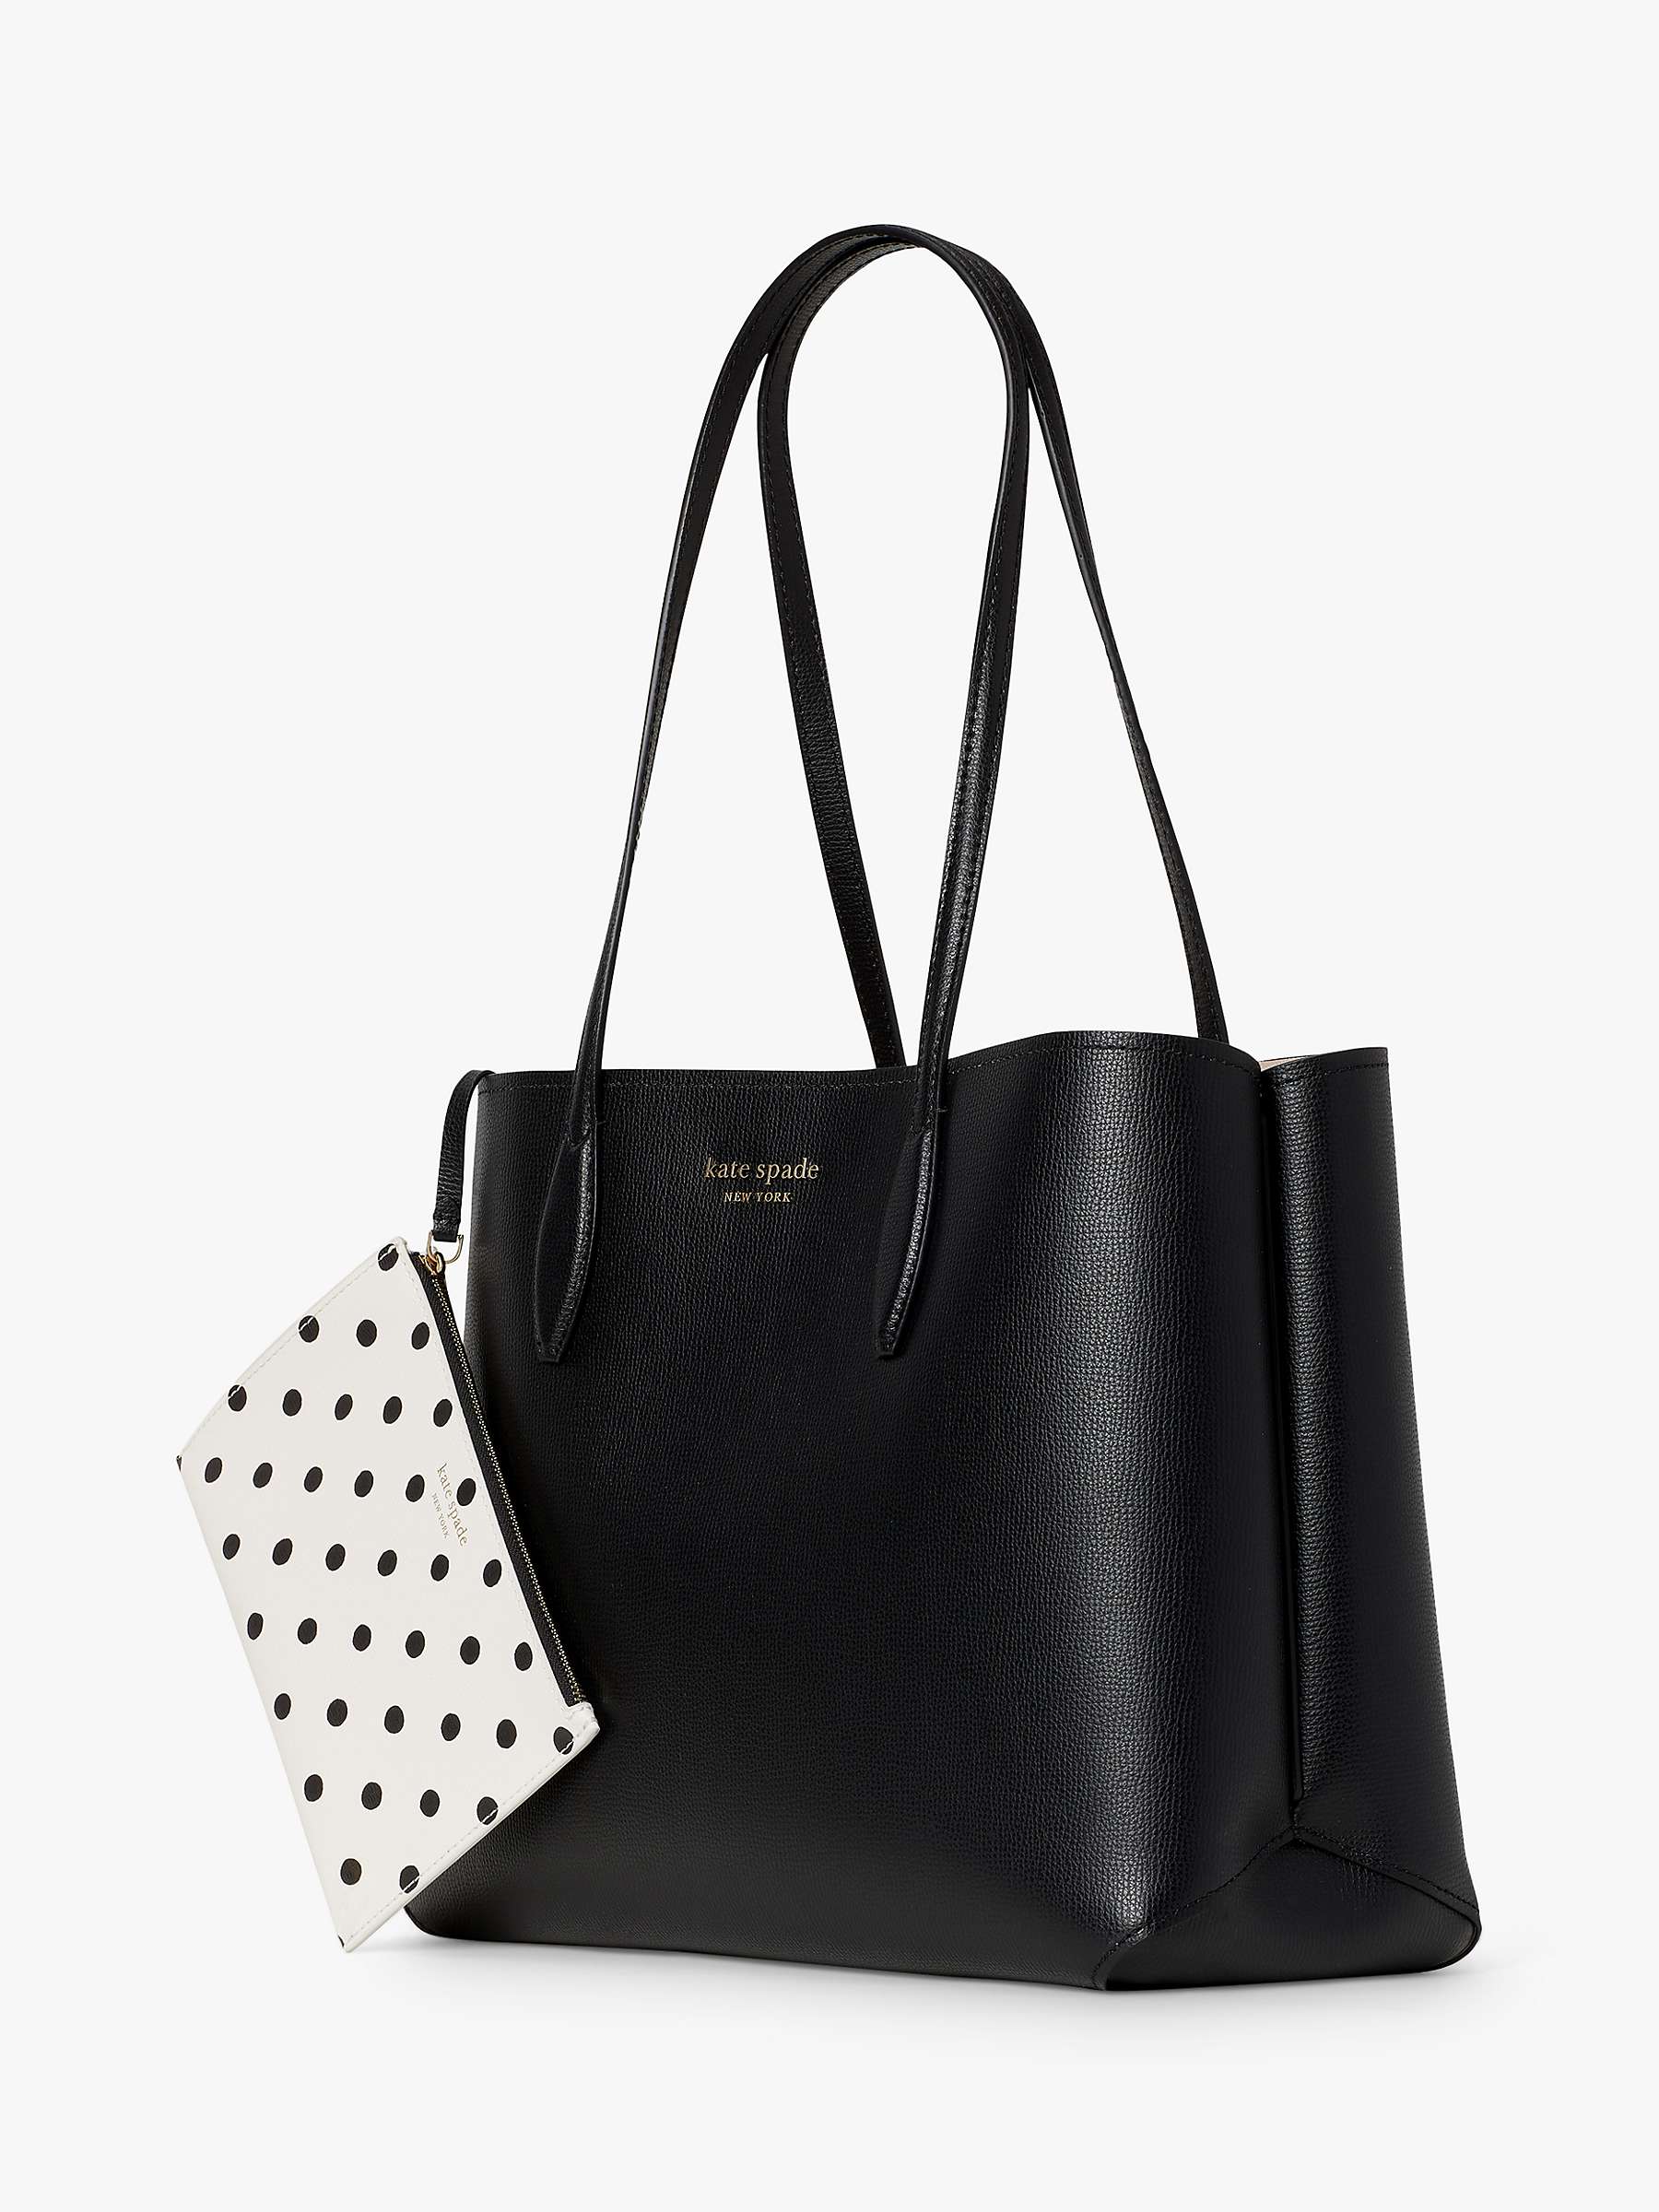 kate spade new york All Day Leather Large Tote Bag, Black at John Lewis